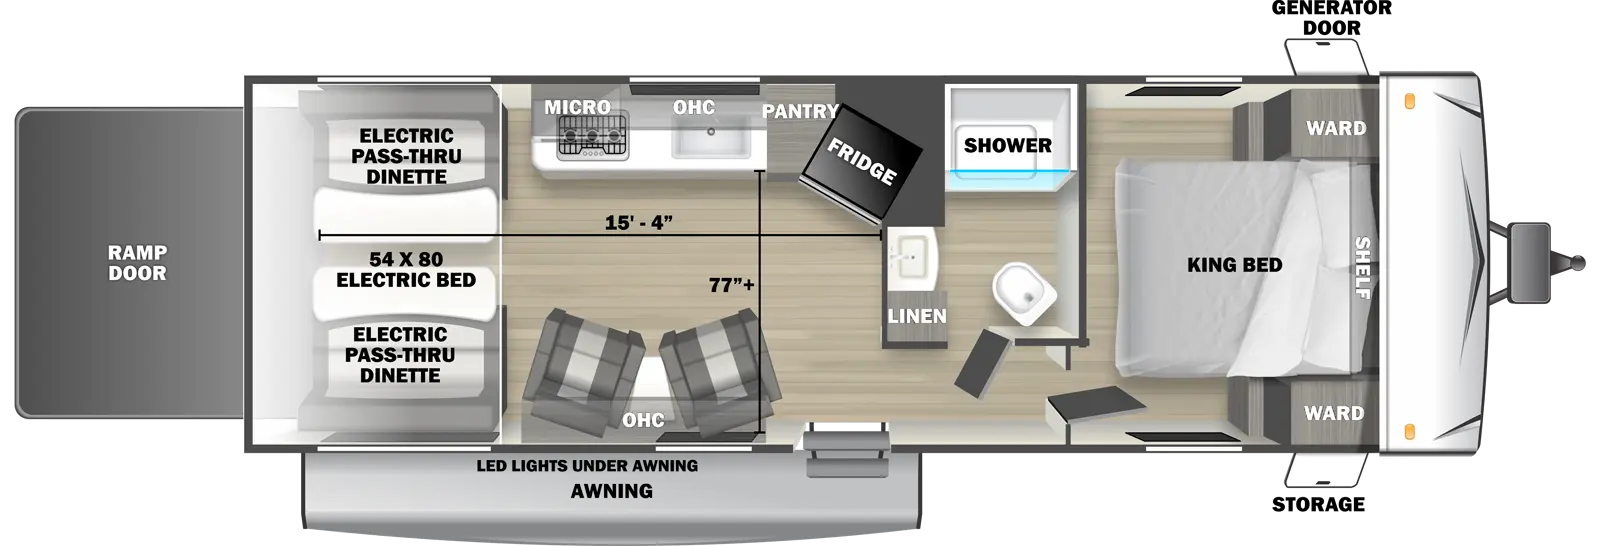 The 2500SLS travel trailer has no slide outs, 1 entry door and 1 rear ramp door. Exterior features include an awning with LED lights, front door side storage and front off-door side generator door. Interior layout from front to back includes: front bedroom with foot-facing King bed, shelf over the bed, and front corner wardrobes; off-door side bathroom with shower, linen storage, toilet and single sink vanity; off-door side kitchen with overhead microwave, overhead cabinets, pantry, stovetop and angled refrigerator; 2 door side recliners with end table; and rear electric 60 x 80 bed with opposing side electric pass-through dinette. Cargo length from rear of unit to kitchen wall is 15 ft. 4 in. Cargo width from kitchen countertop to door side wall is 77 inches.